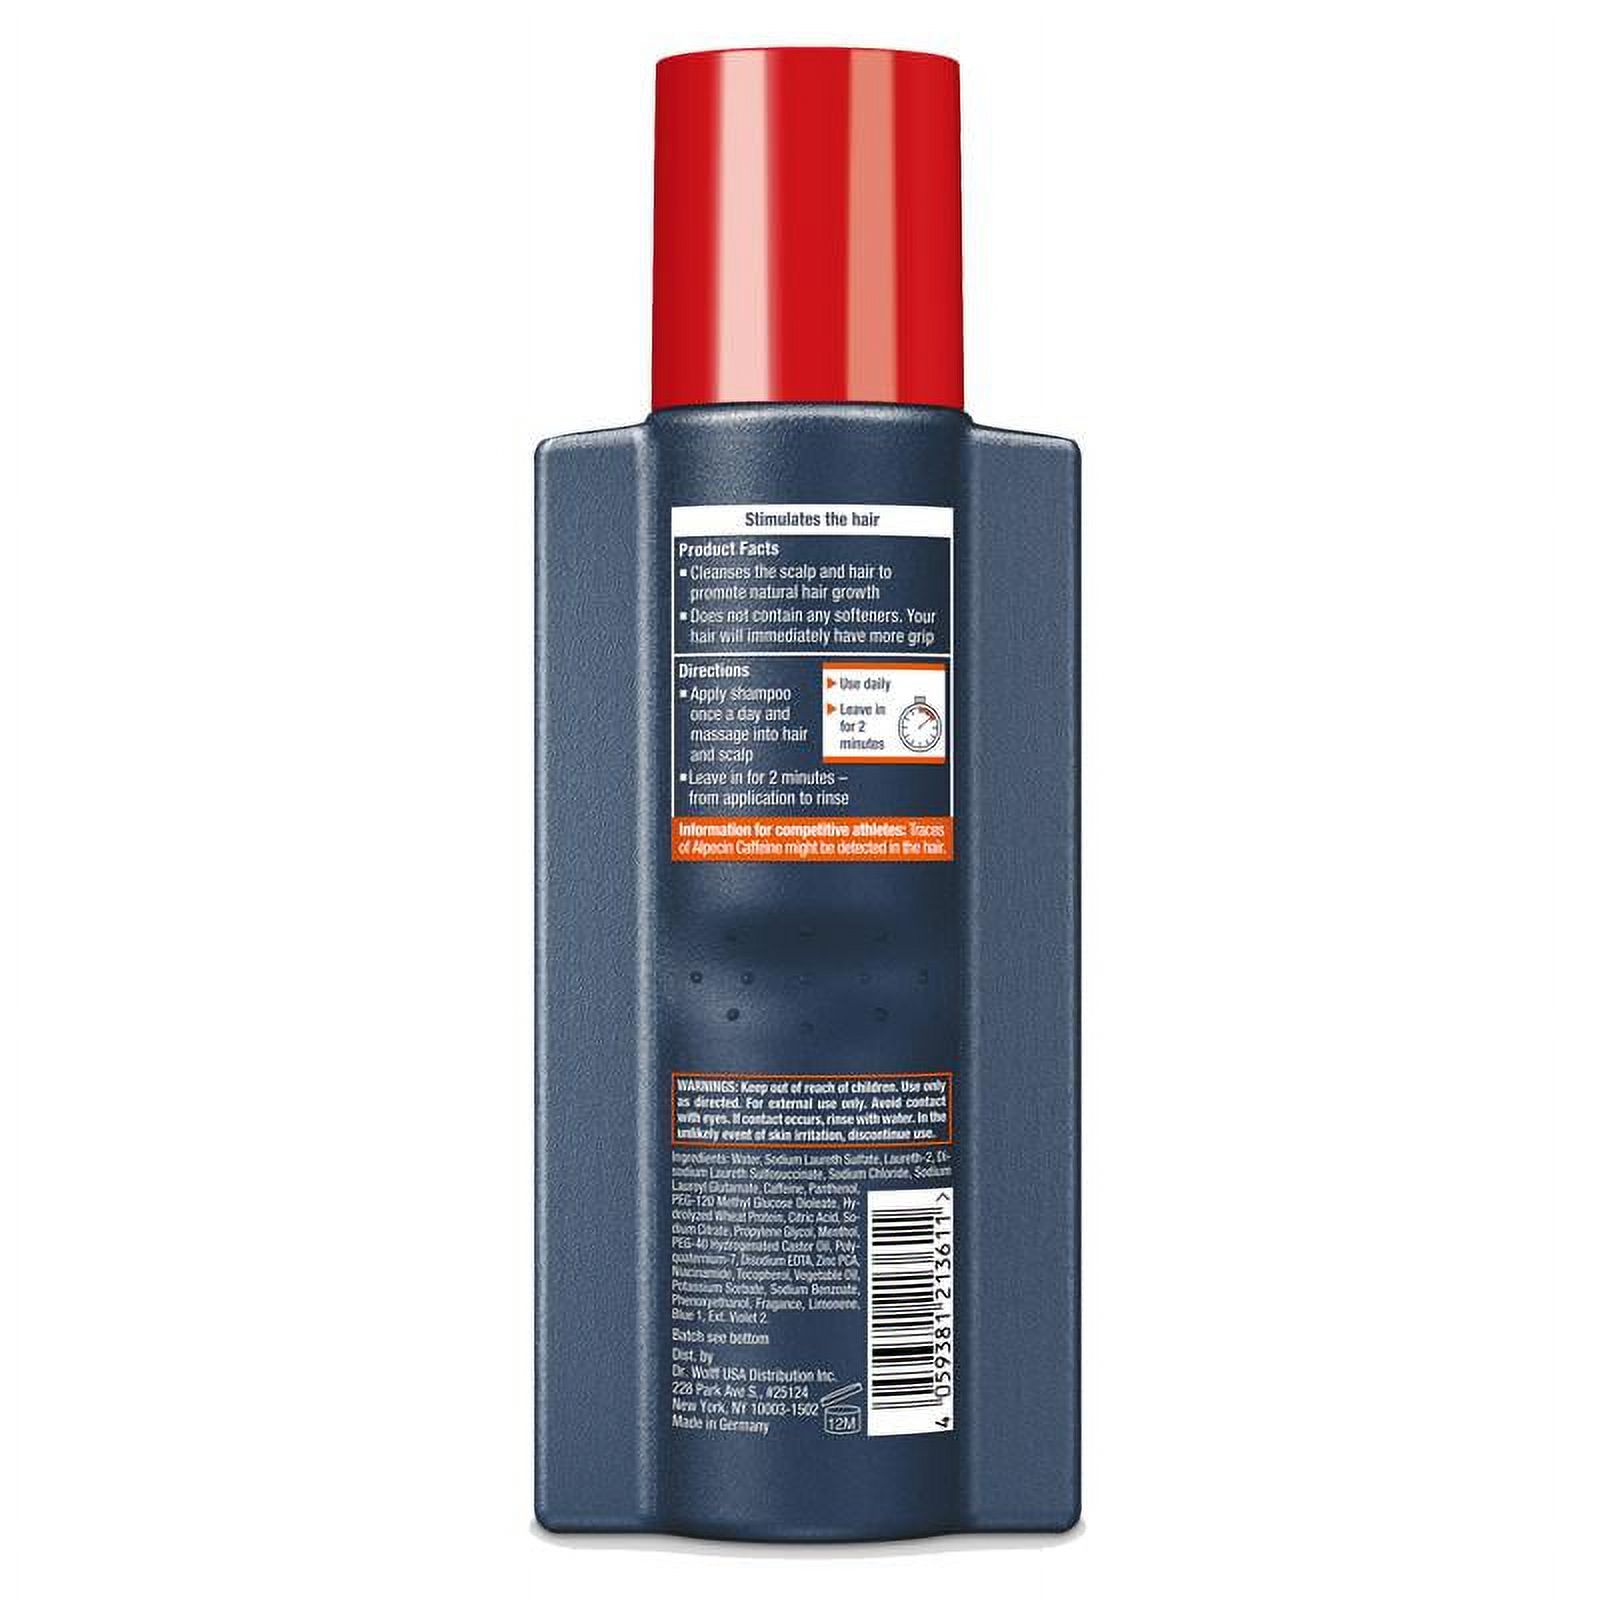 Alpecin Caffeine Shampoo C1 - Cleanses the Scalp to Promote Natural Hair Growth - image 2 of 4